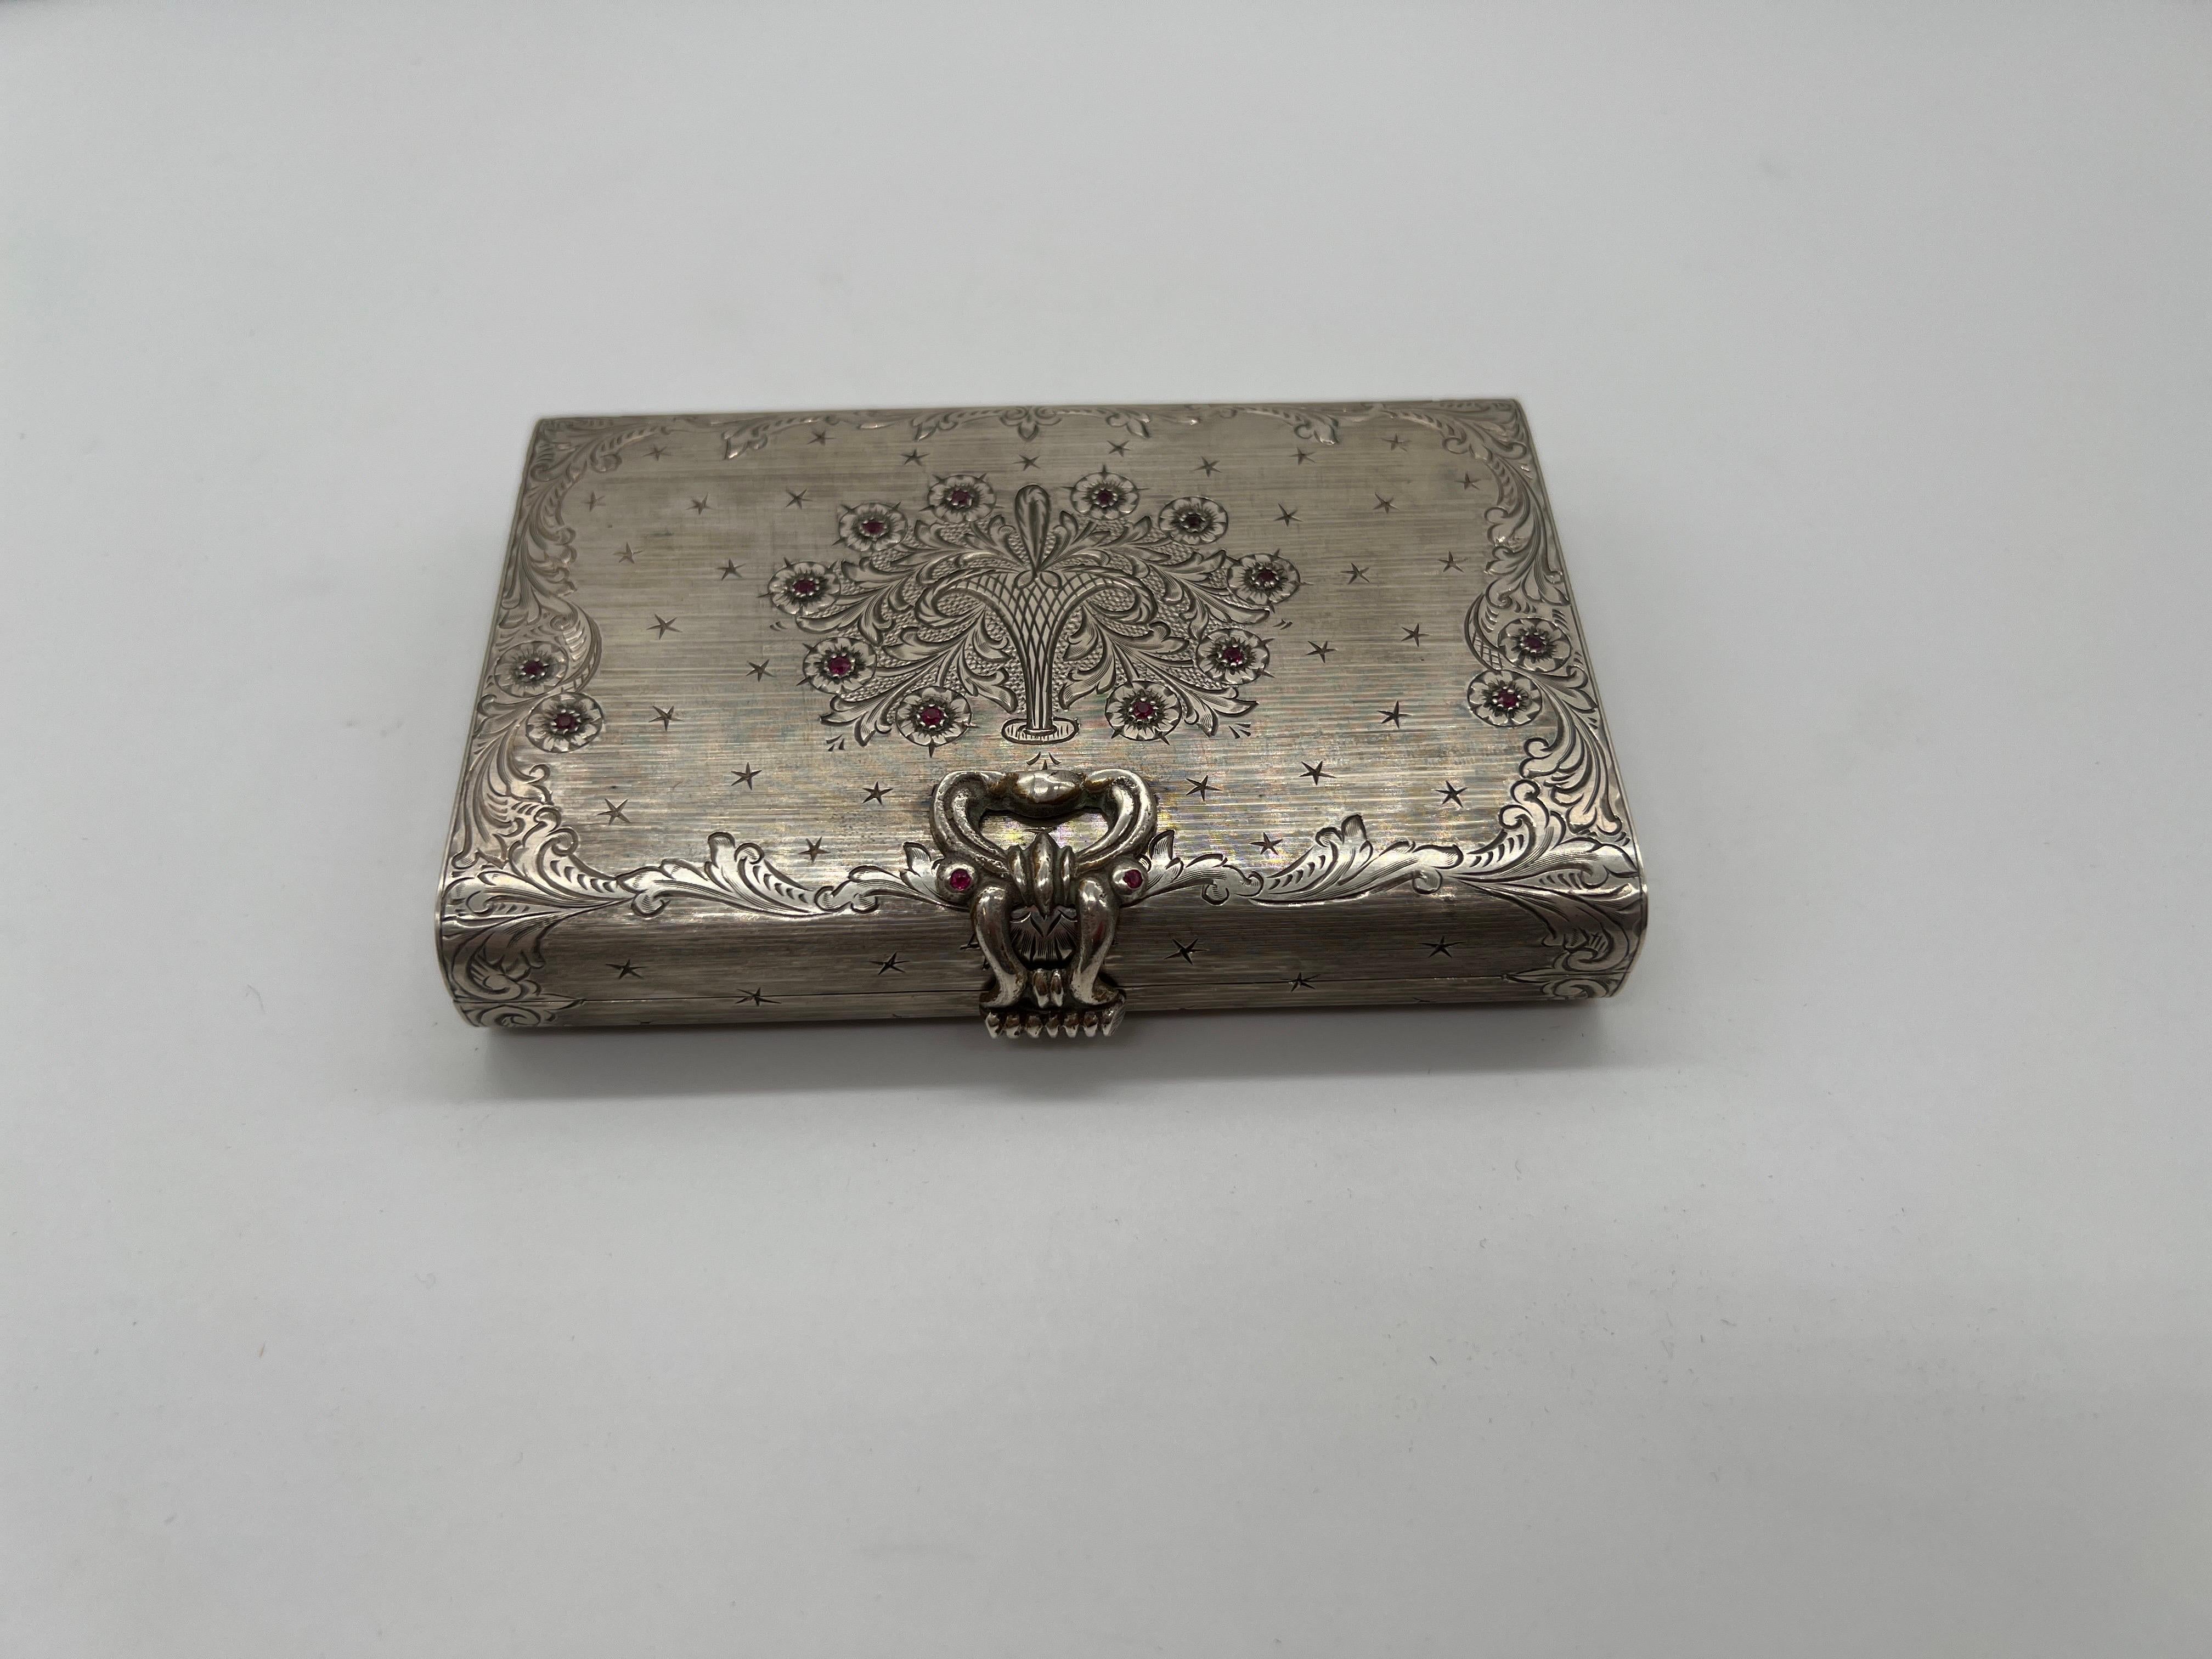 Italian, 20th century.

A beautiful Italian 800 silver miniadiere or makeup compact case. The case has rubies inset to the top which accents the hand chased floral decoration. The sides and verso also have fine detail to accent. Interior features a